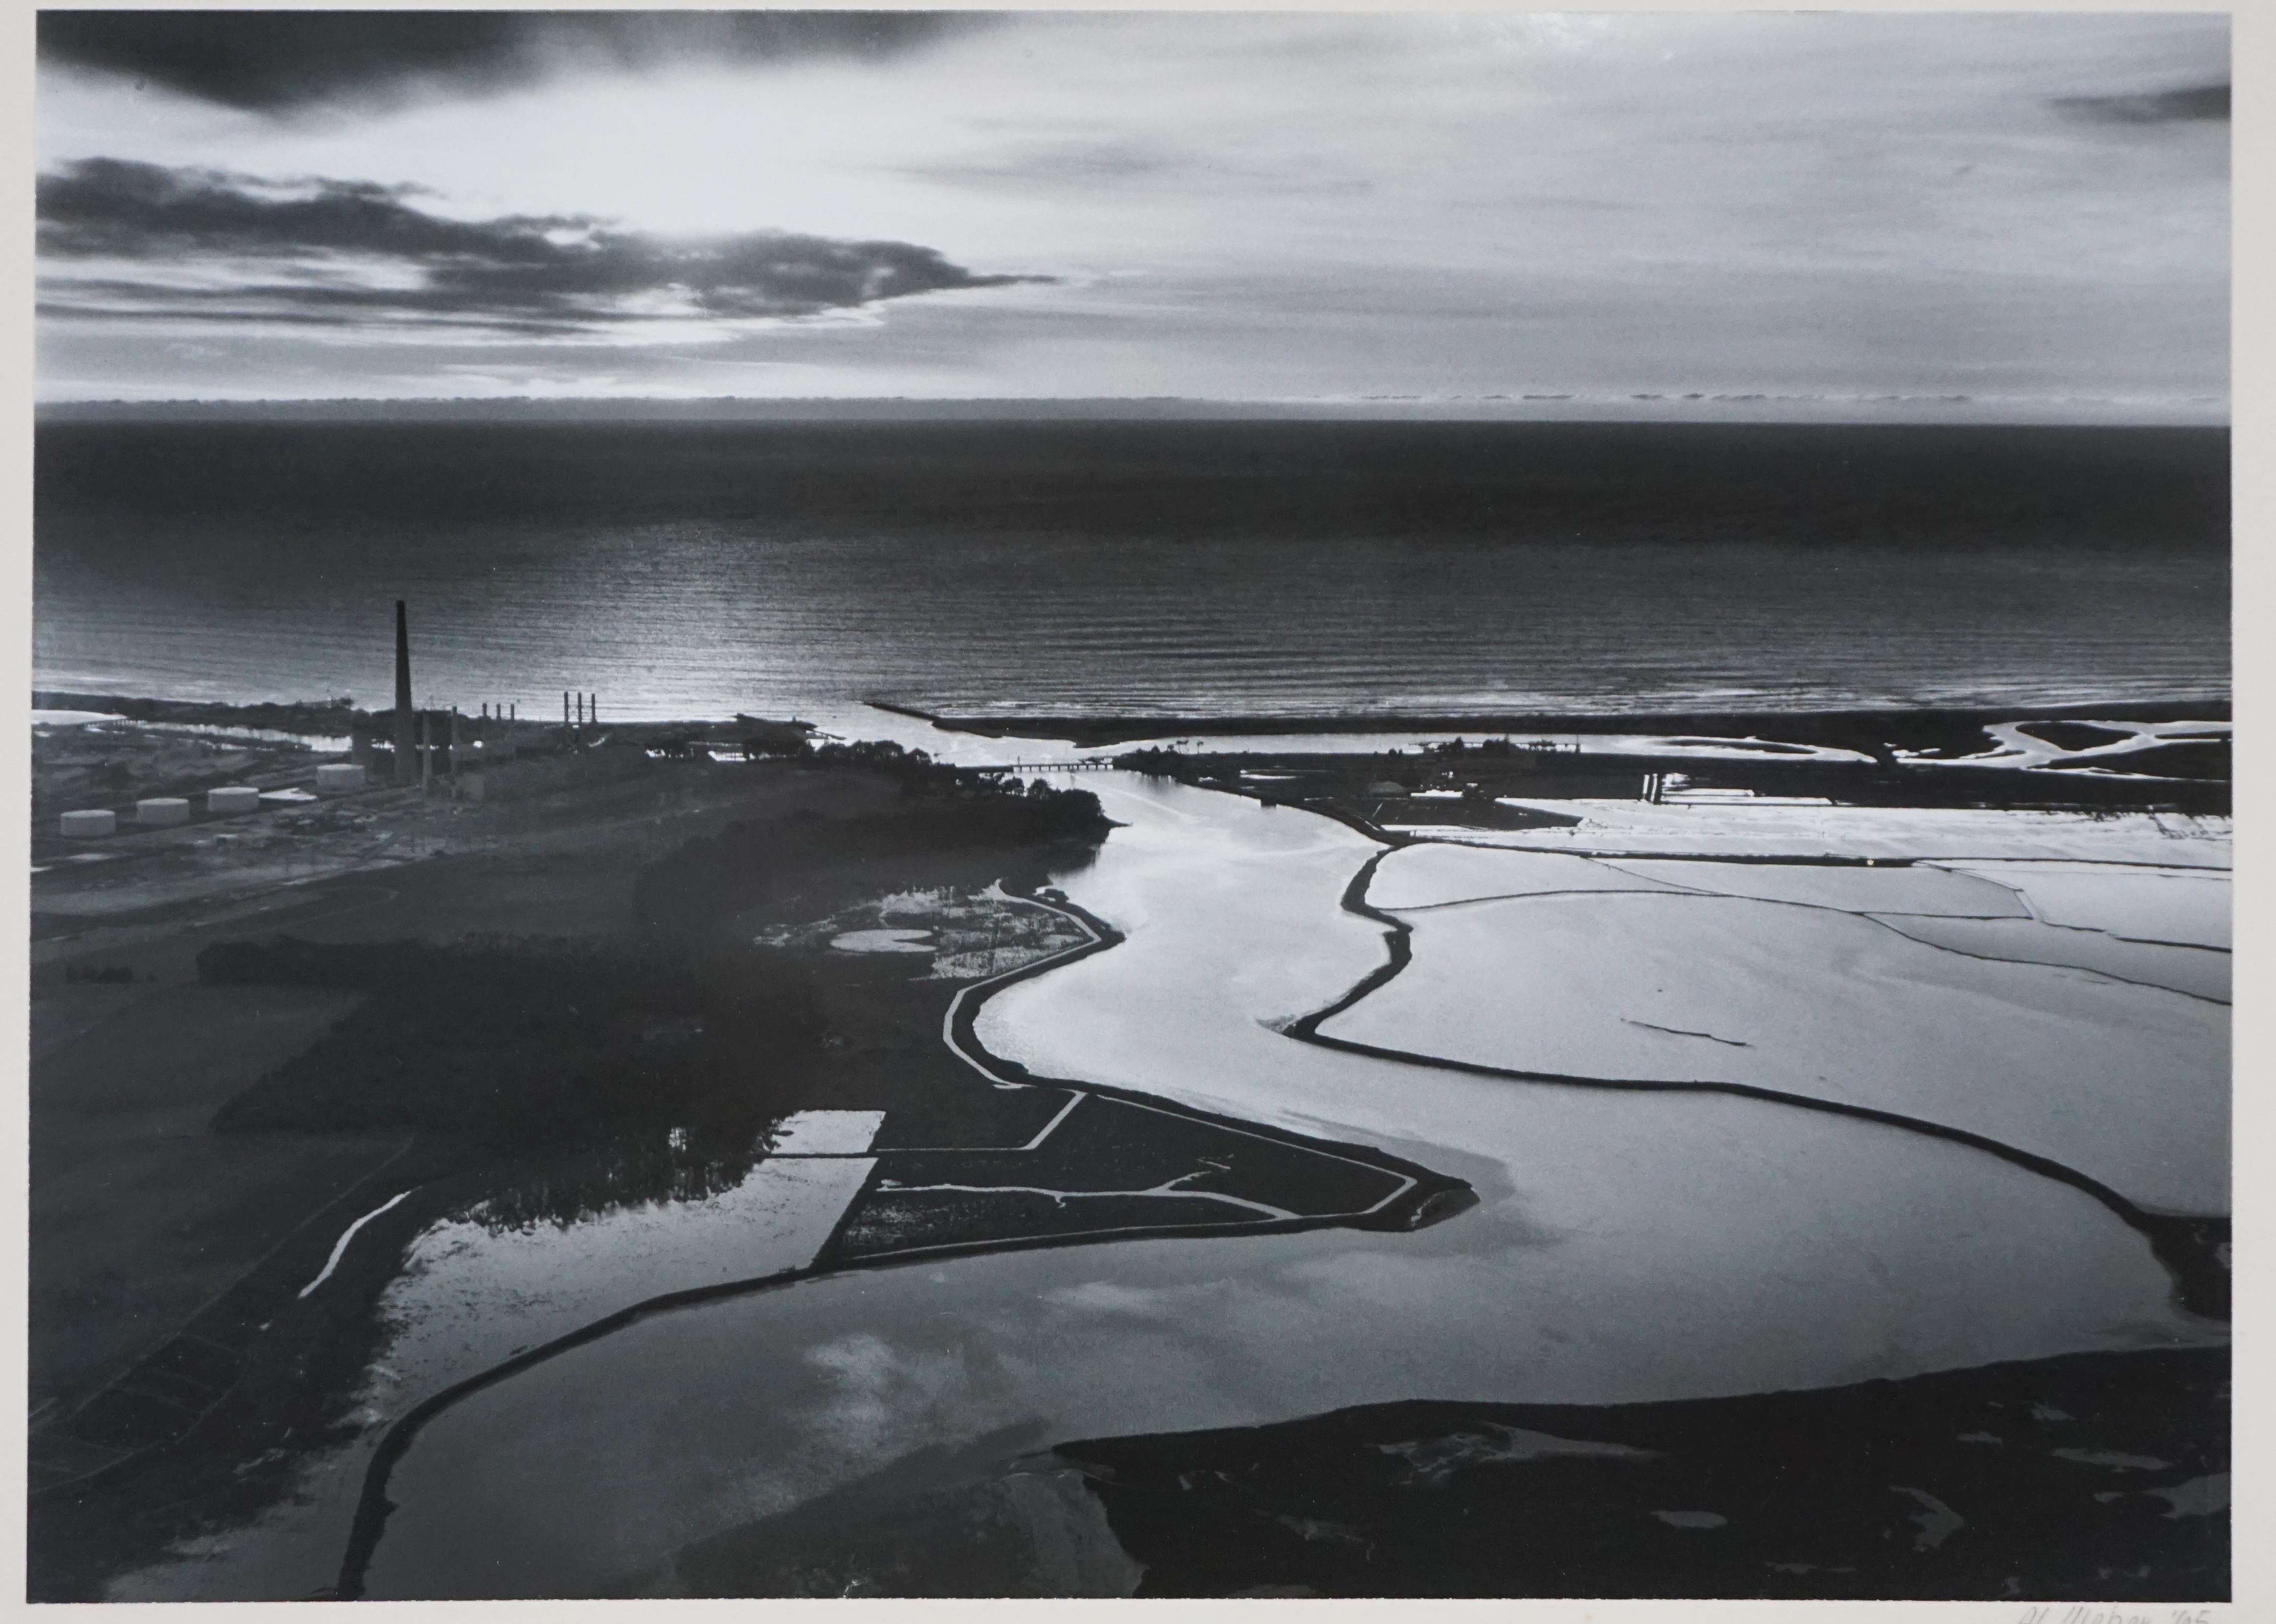 Moss Landing - 1965 Original Black and White Photograph

Original black and white photograph of Moss Landing in 1965 by Al Weber (American, 1930-2016). The photograph shows Moss Landing and the Monterey Bay peninsula with the power plant seen to the